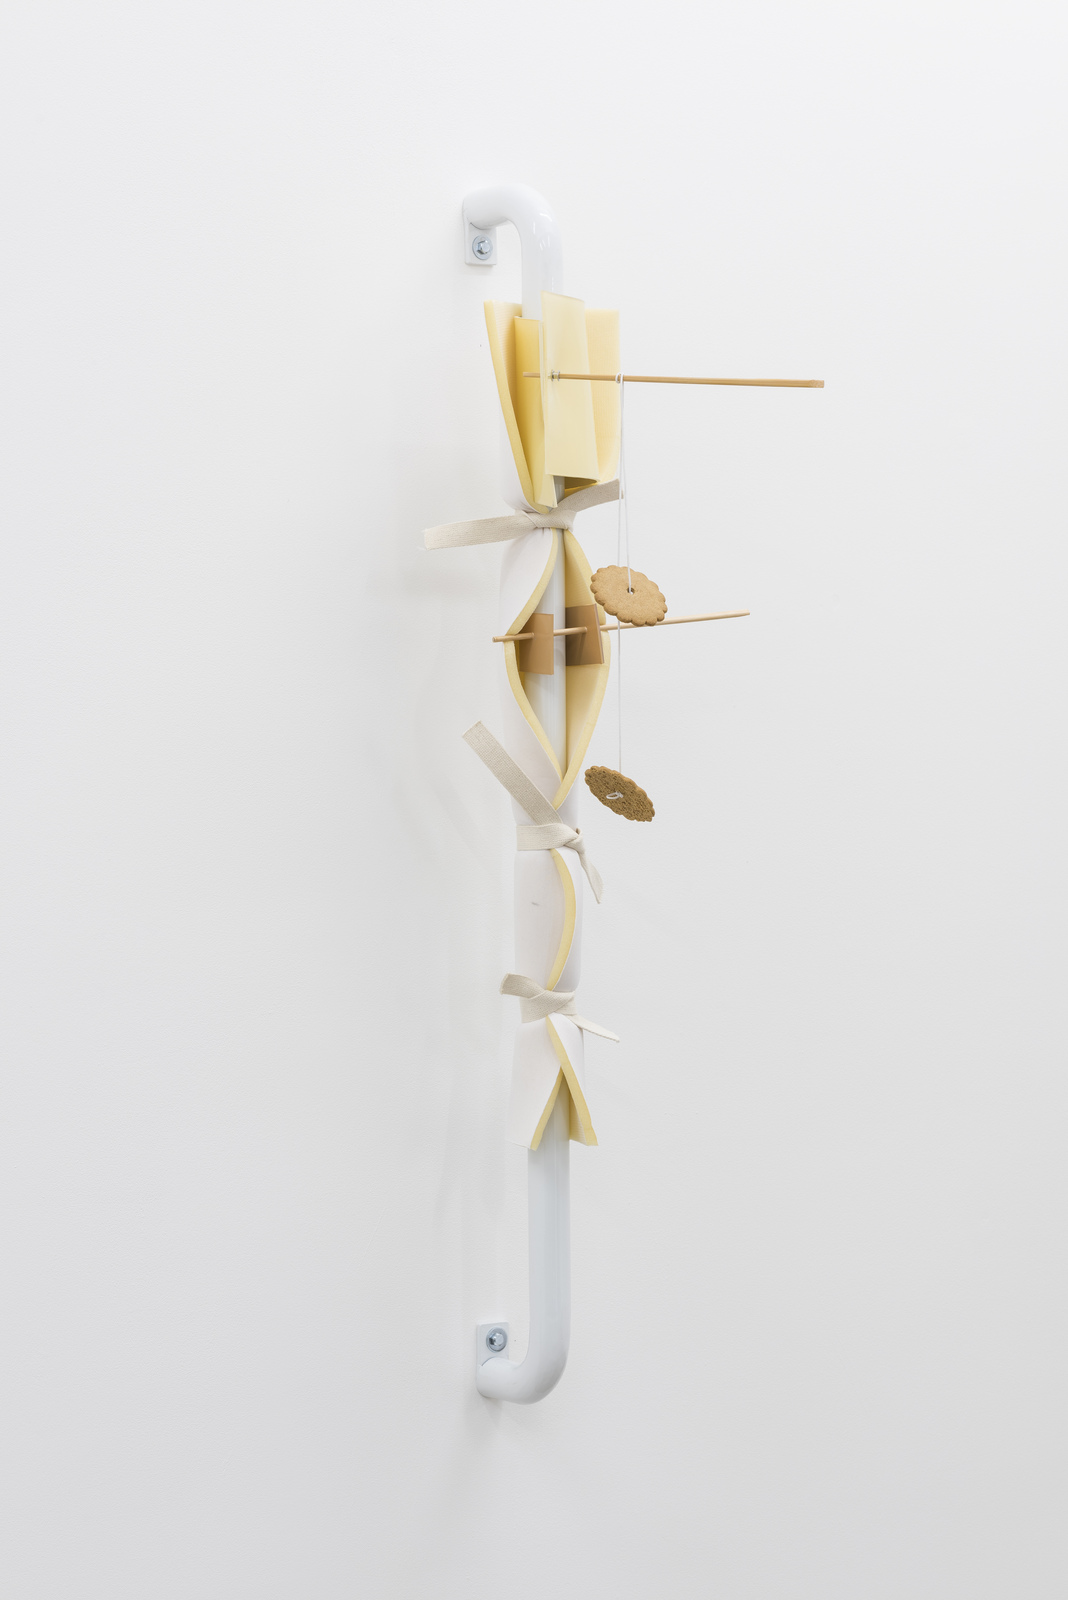 Vanessa Safavi, No Omelette Without Breaking Eggs (Holding Substitute IV), 2016 (3)